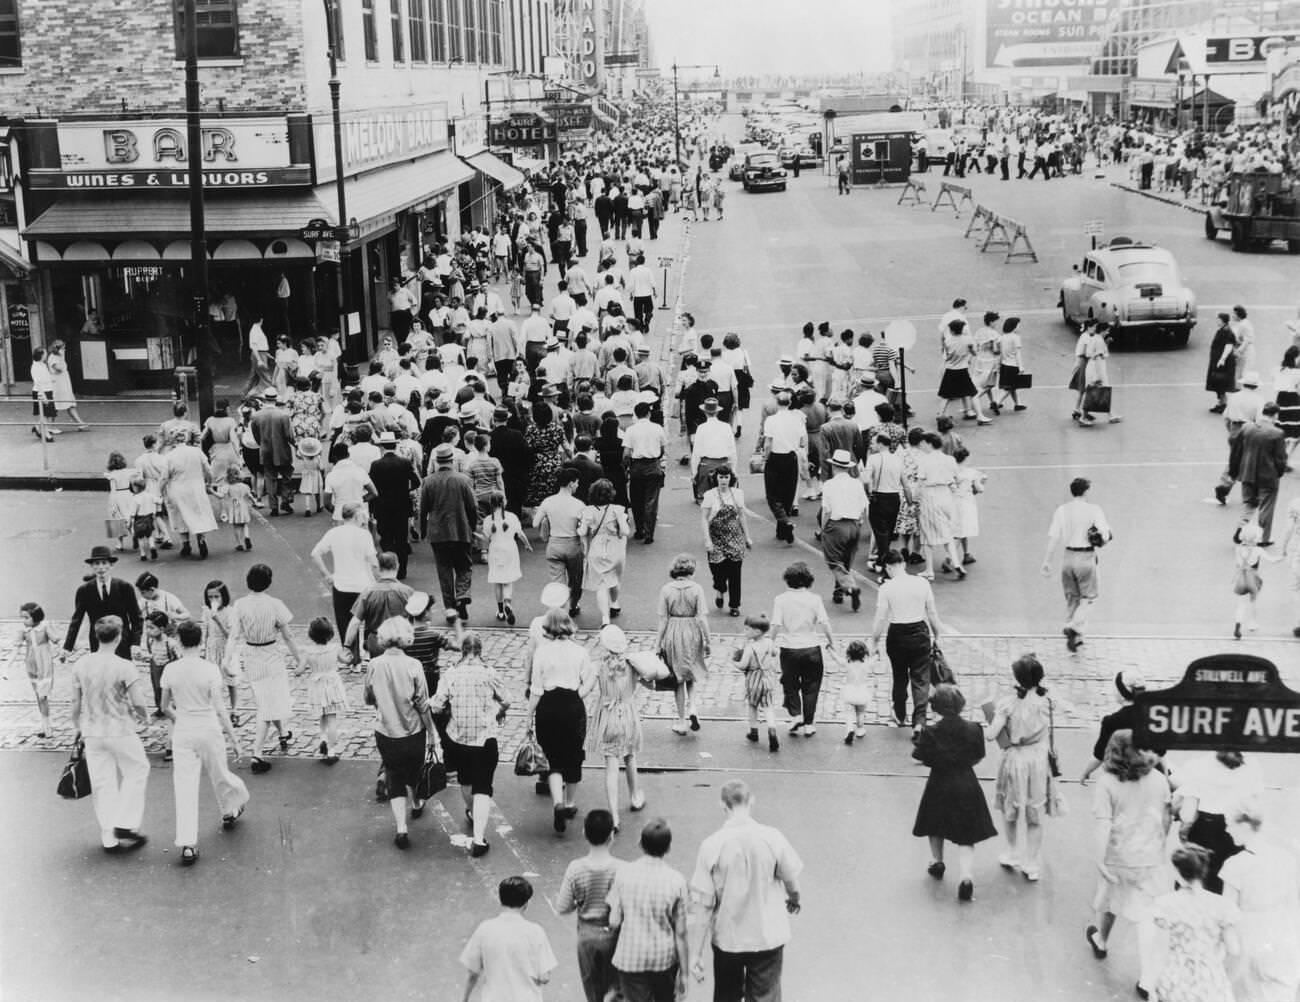 Street Scene At Surf And Stillwell Avenues, Coney Island, 1944